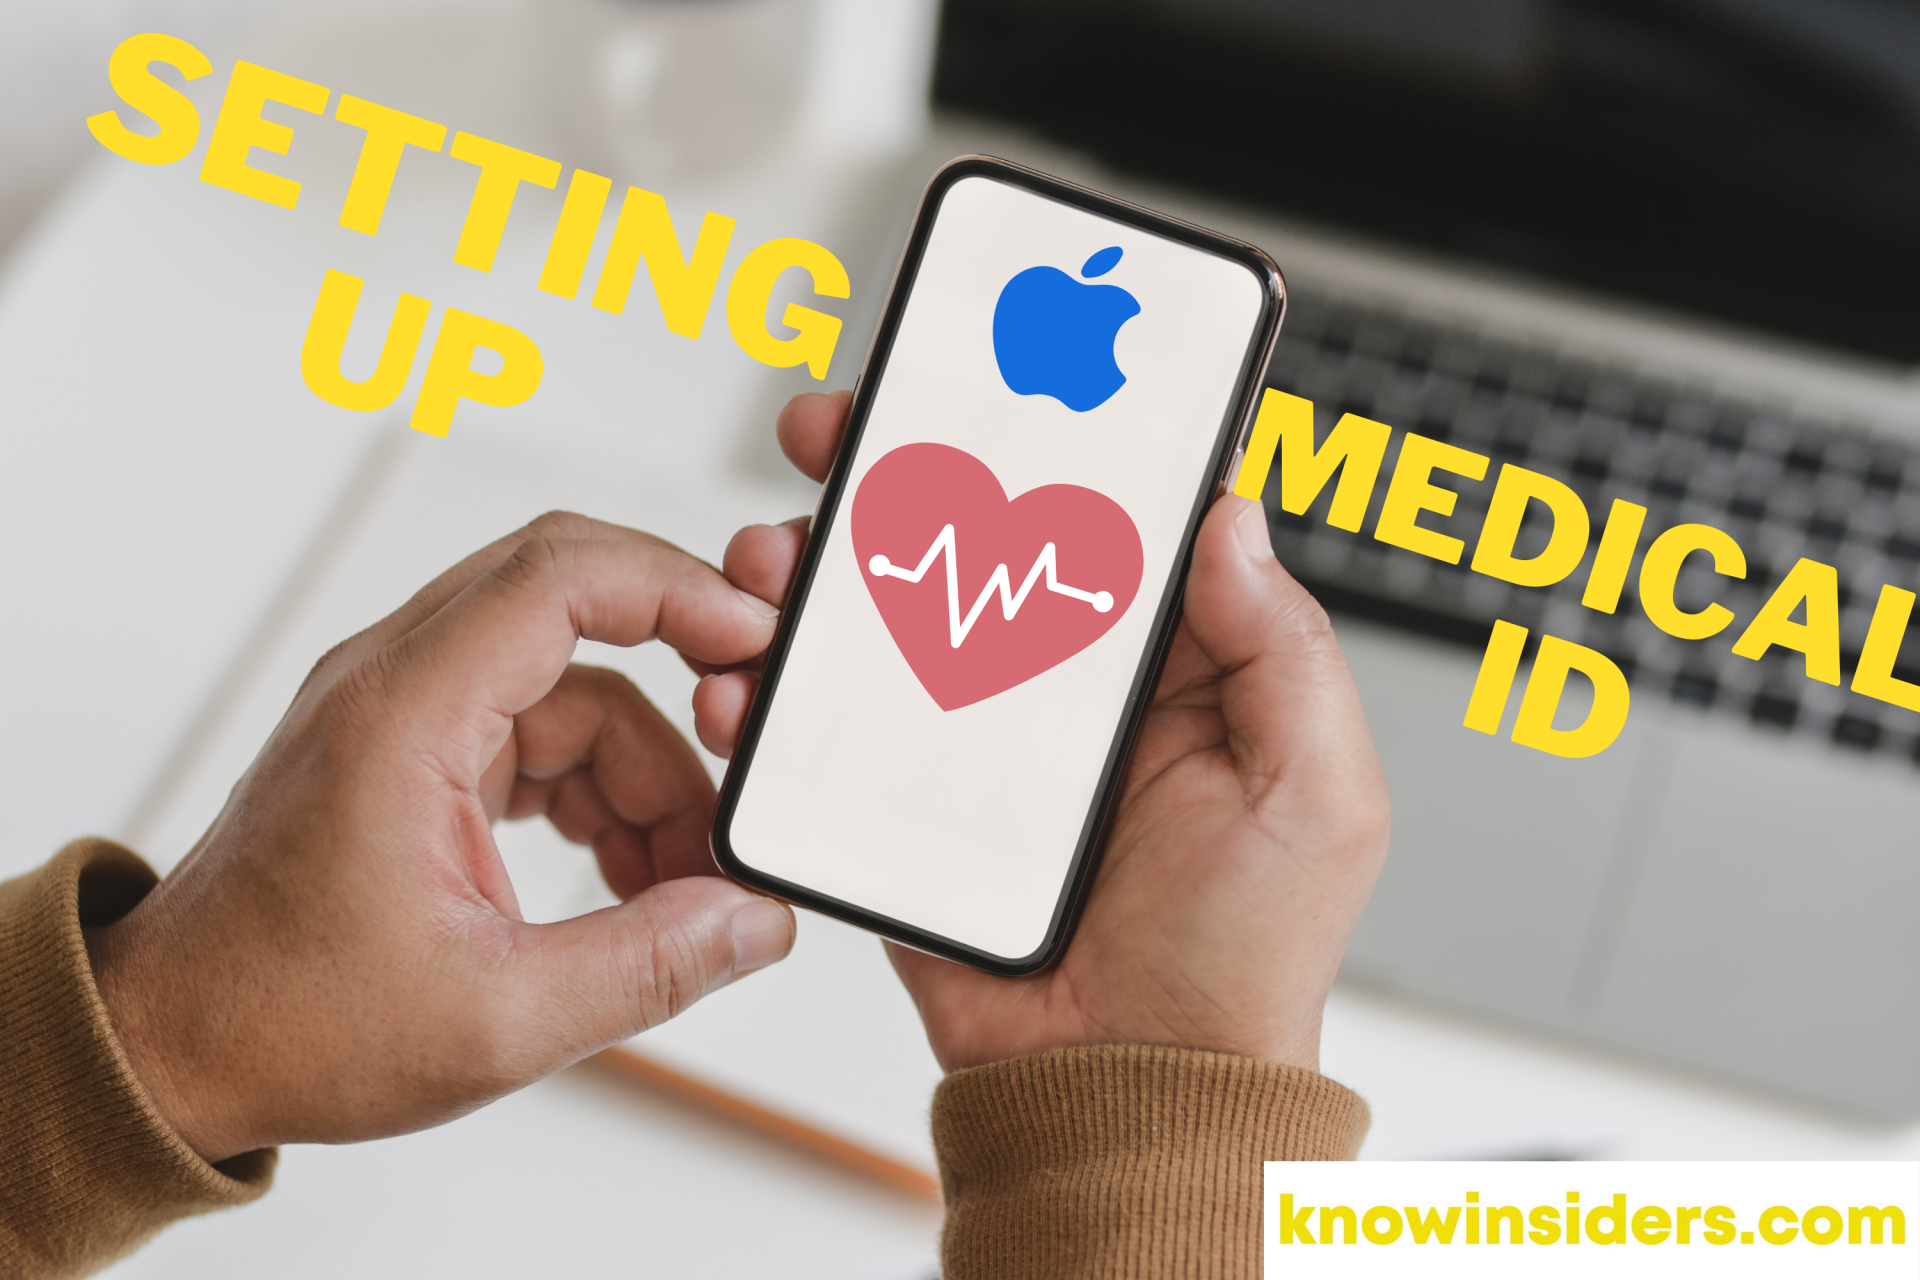 How To Set Up 'Covid-19 Medical ID' on iPhone: 6  Easy Steps and 5 Reasons to Install